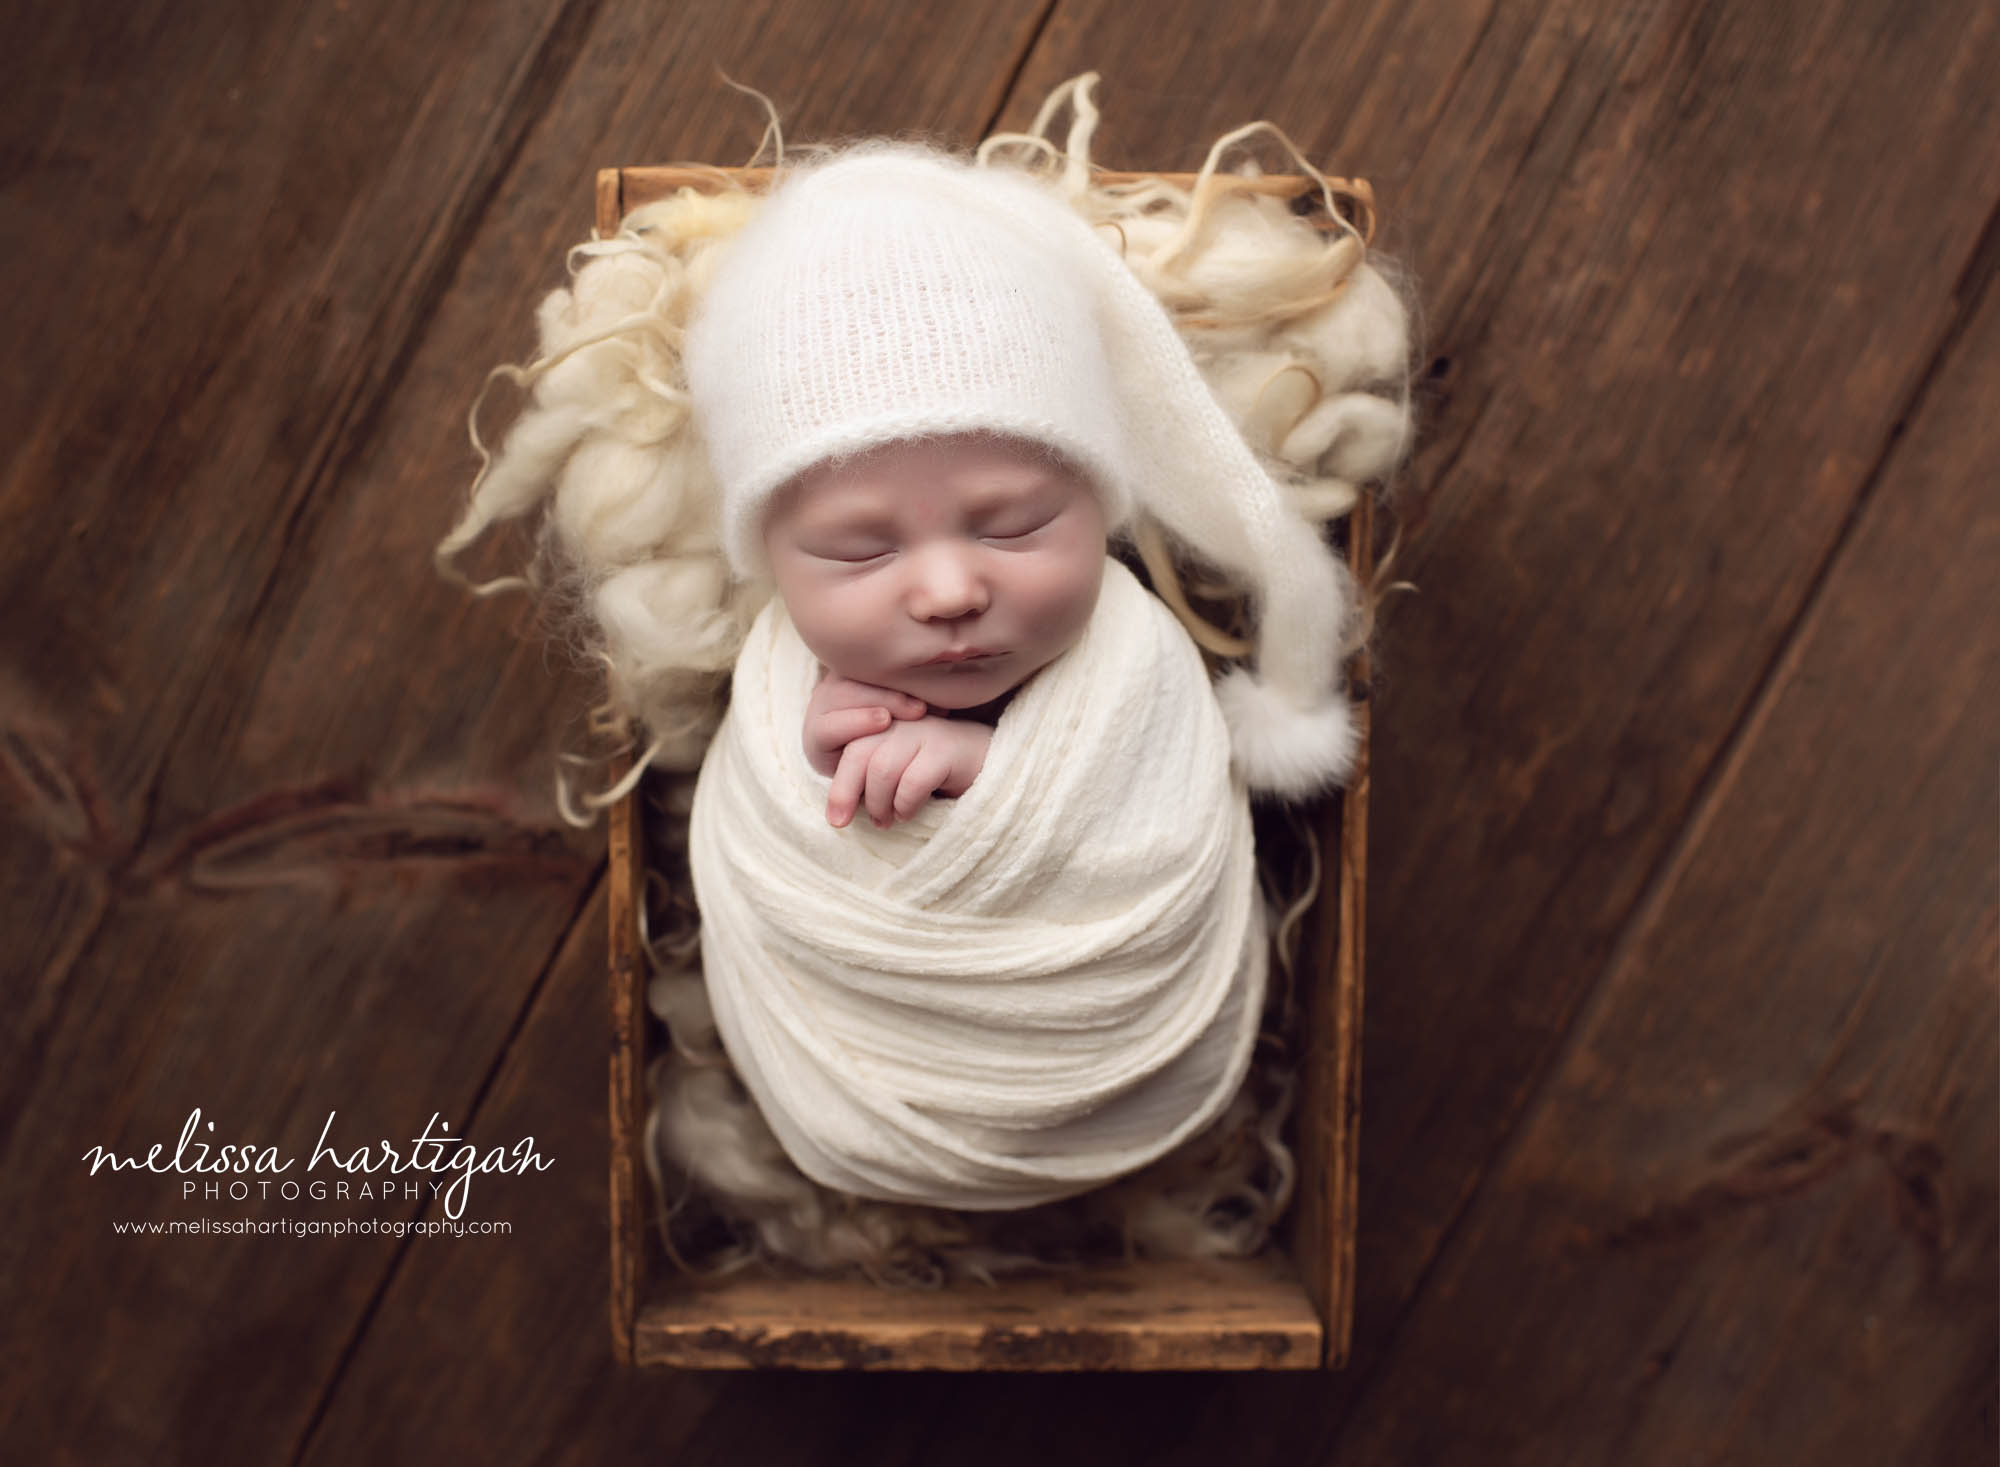 Baby boy wrapped up poised in wooden crate with rustic look cream and white tones newborn photos CT